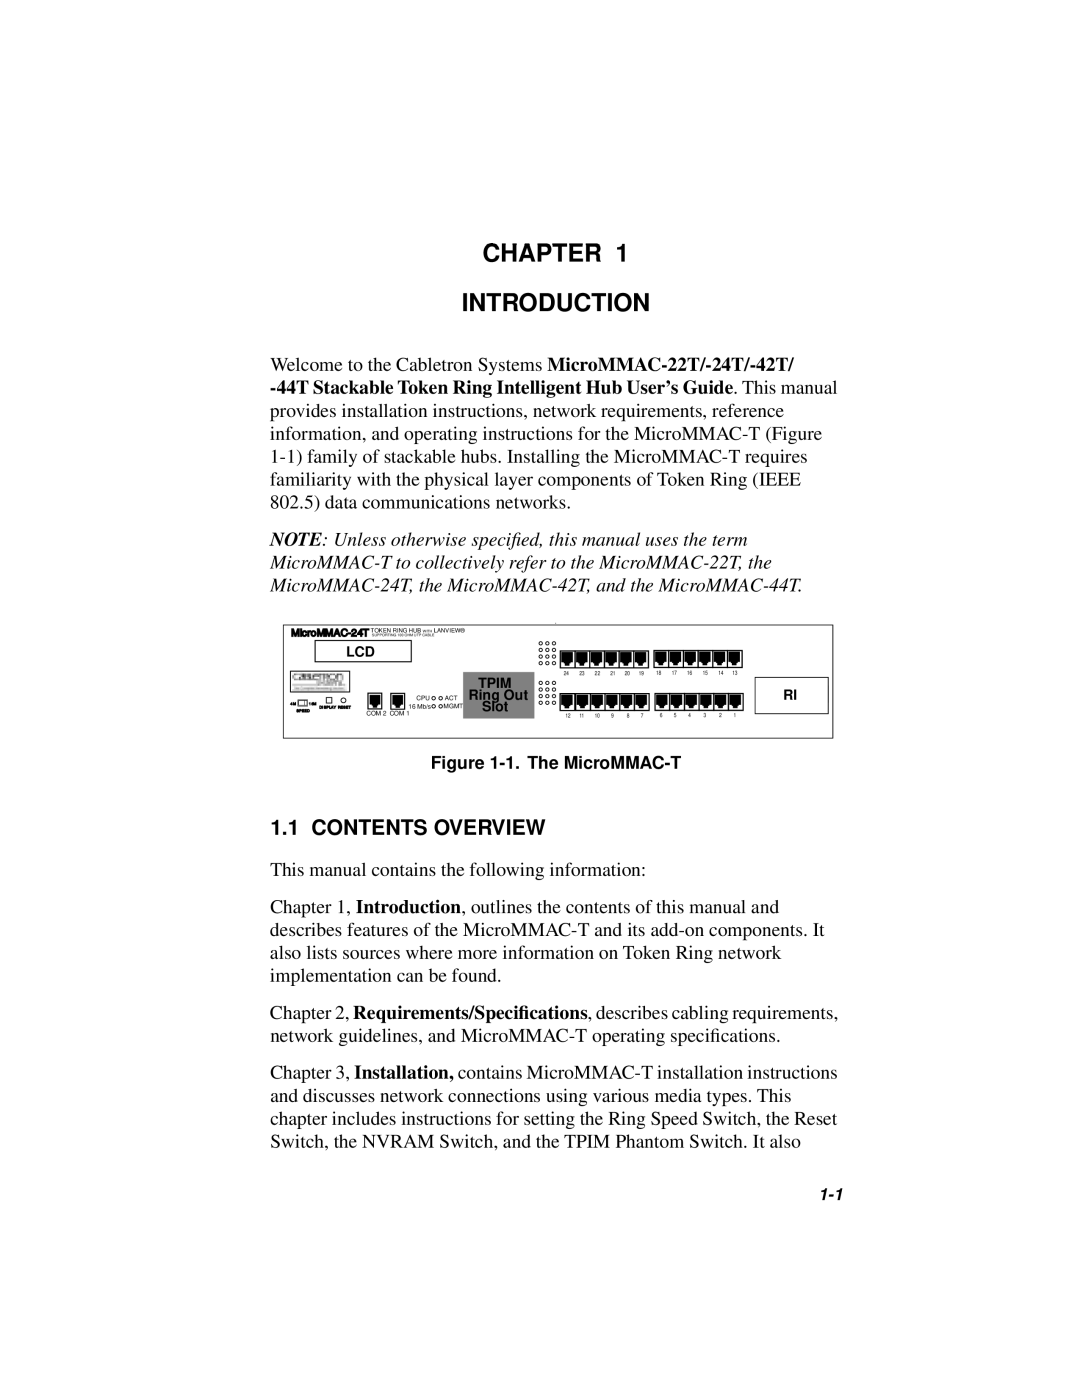 Cabletron Systems MICROMMAC-22T Chapter Introduction, Contents Overview, 1. The MicroMMAC-T, Tpim, Ring Out, Slot, 16 Mb/s 